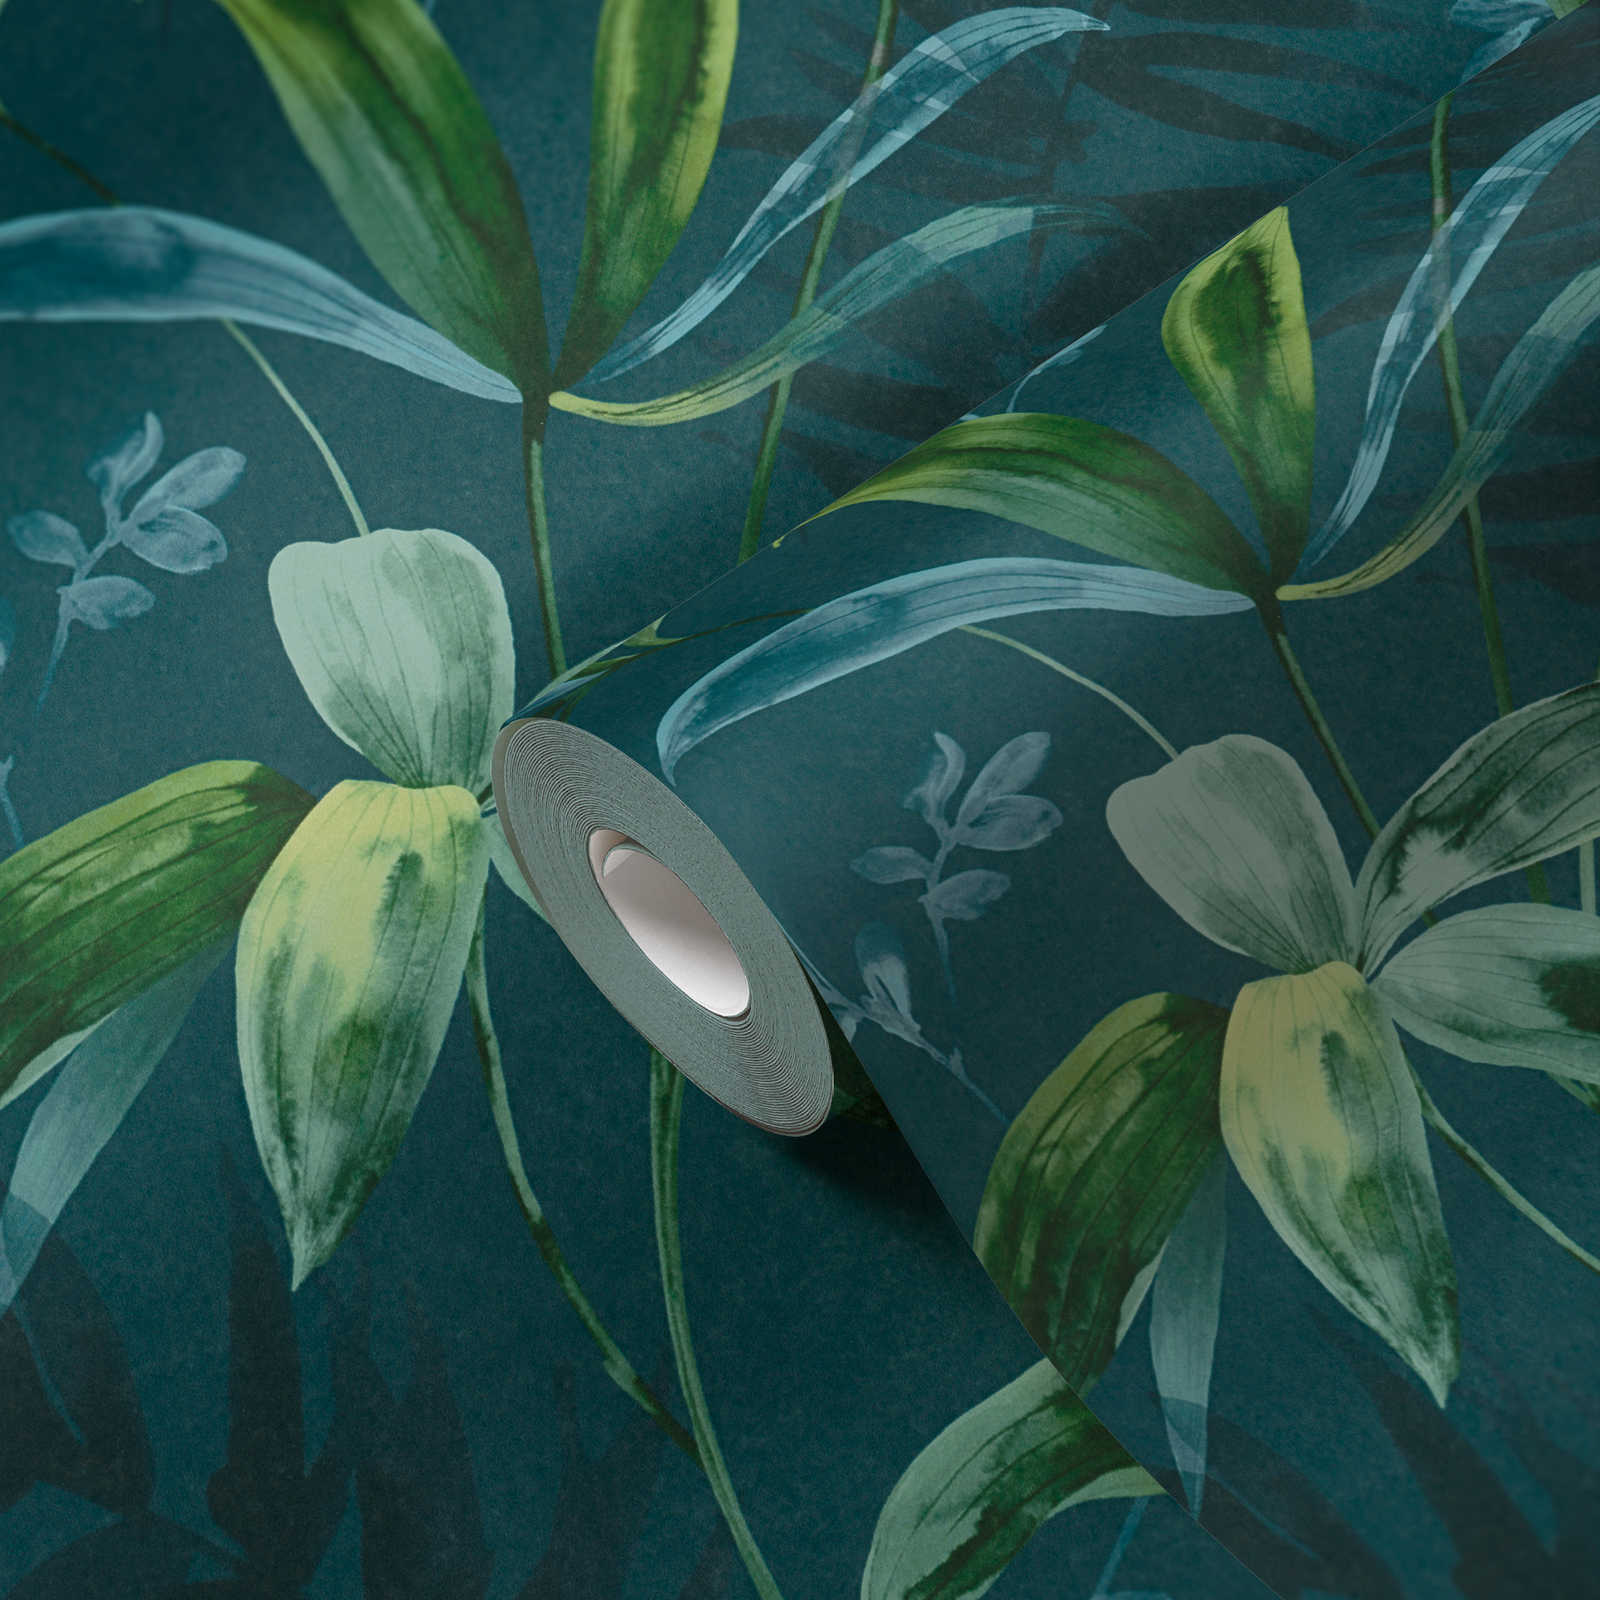             Dark green wallpaper with leaves pattern in watercolour style - blue, green
        